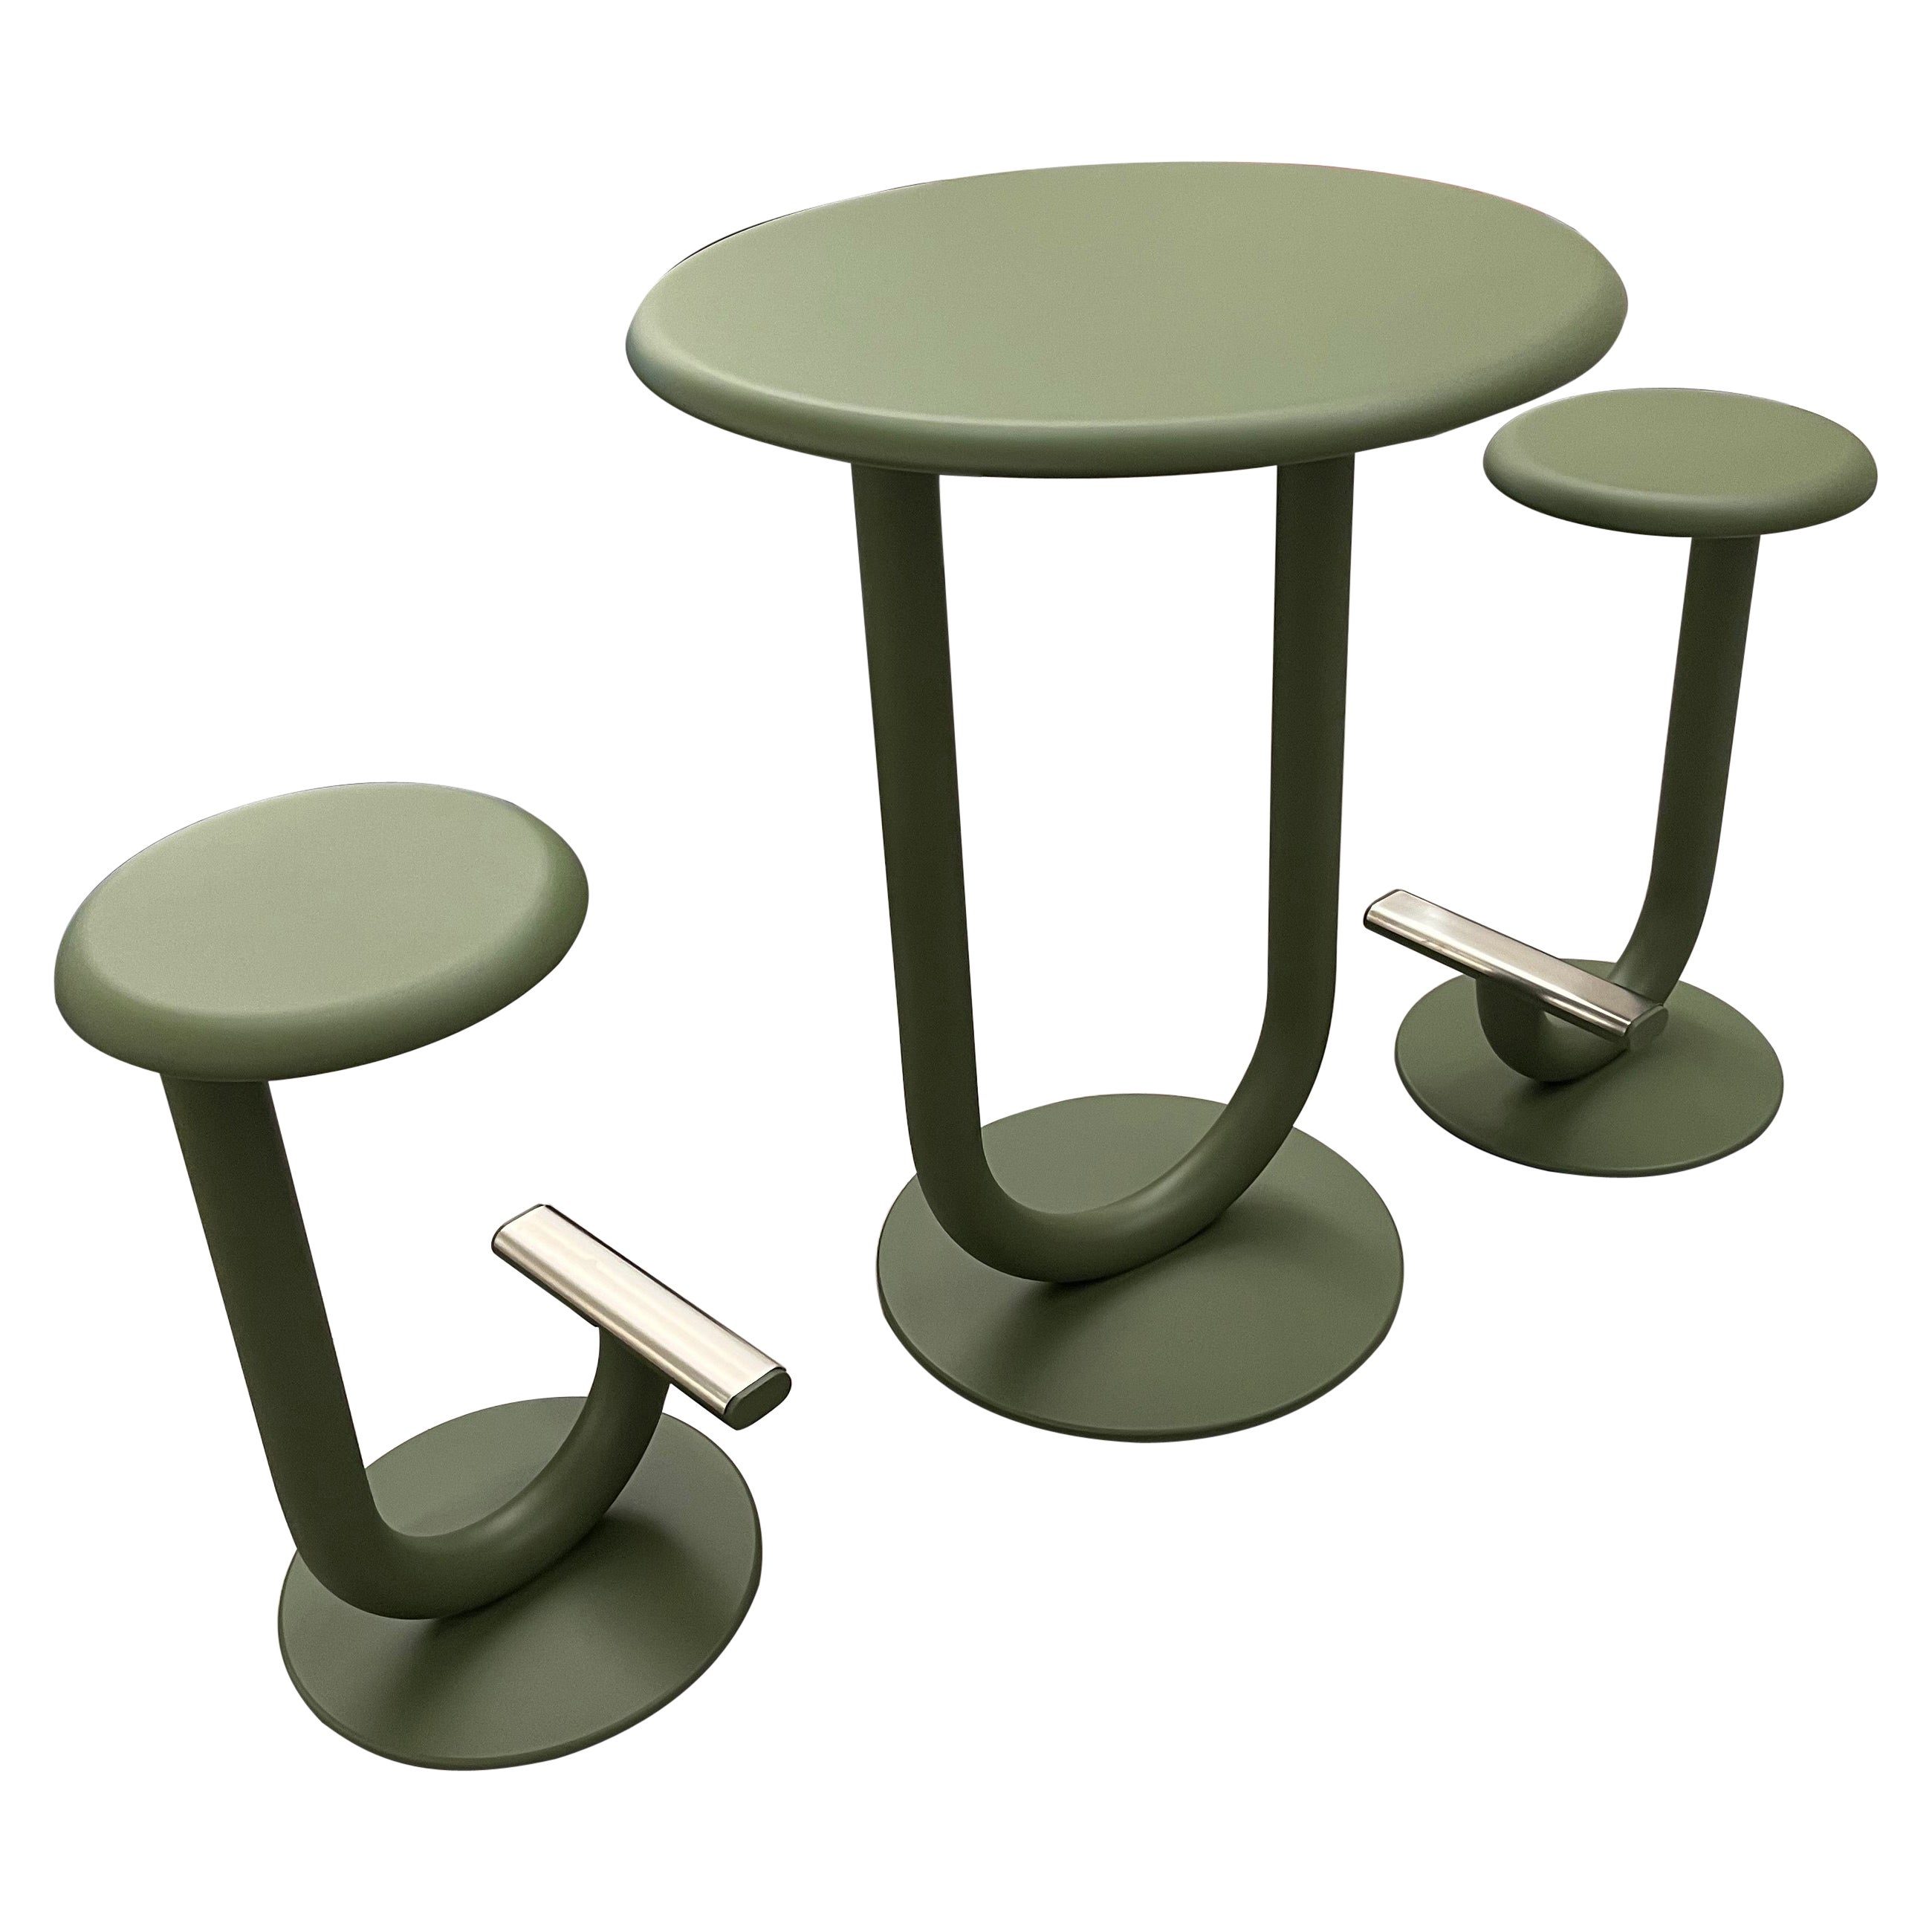 Desalto Strong Bar Table with Stool Designed by Eugeni Quitllet in STOCK